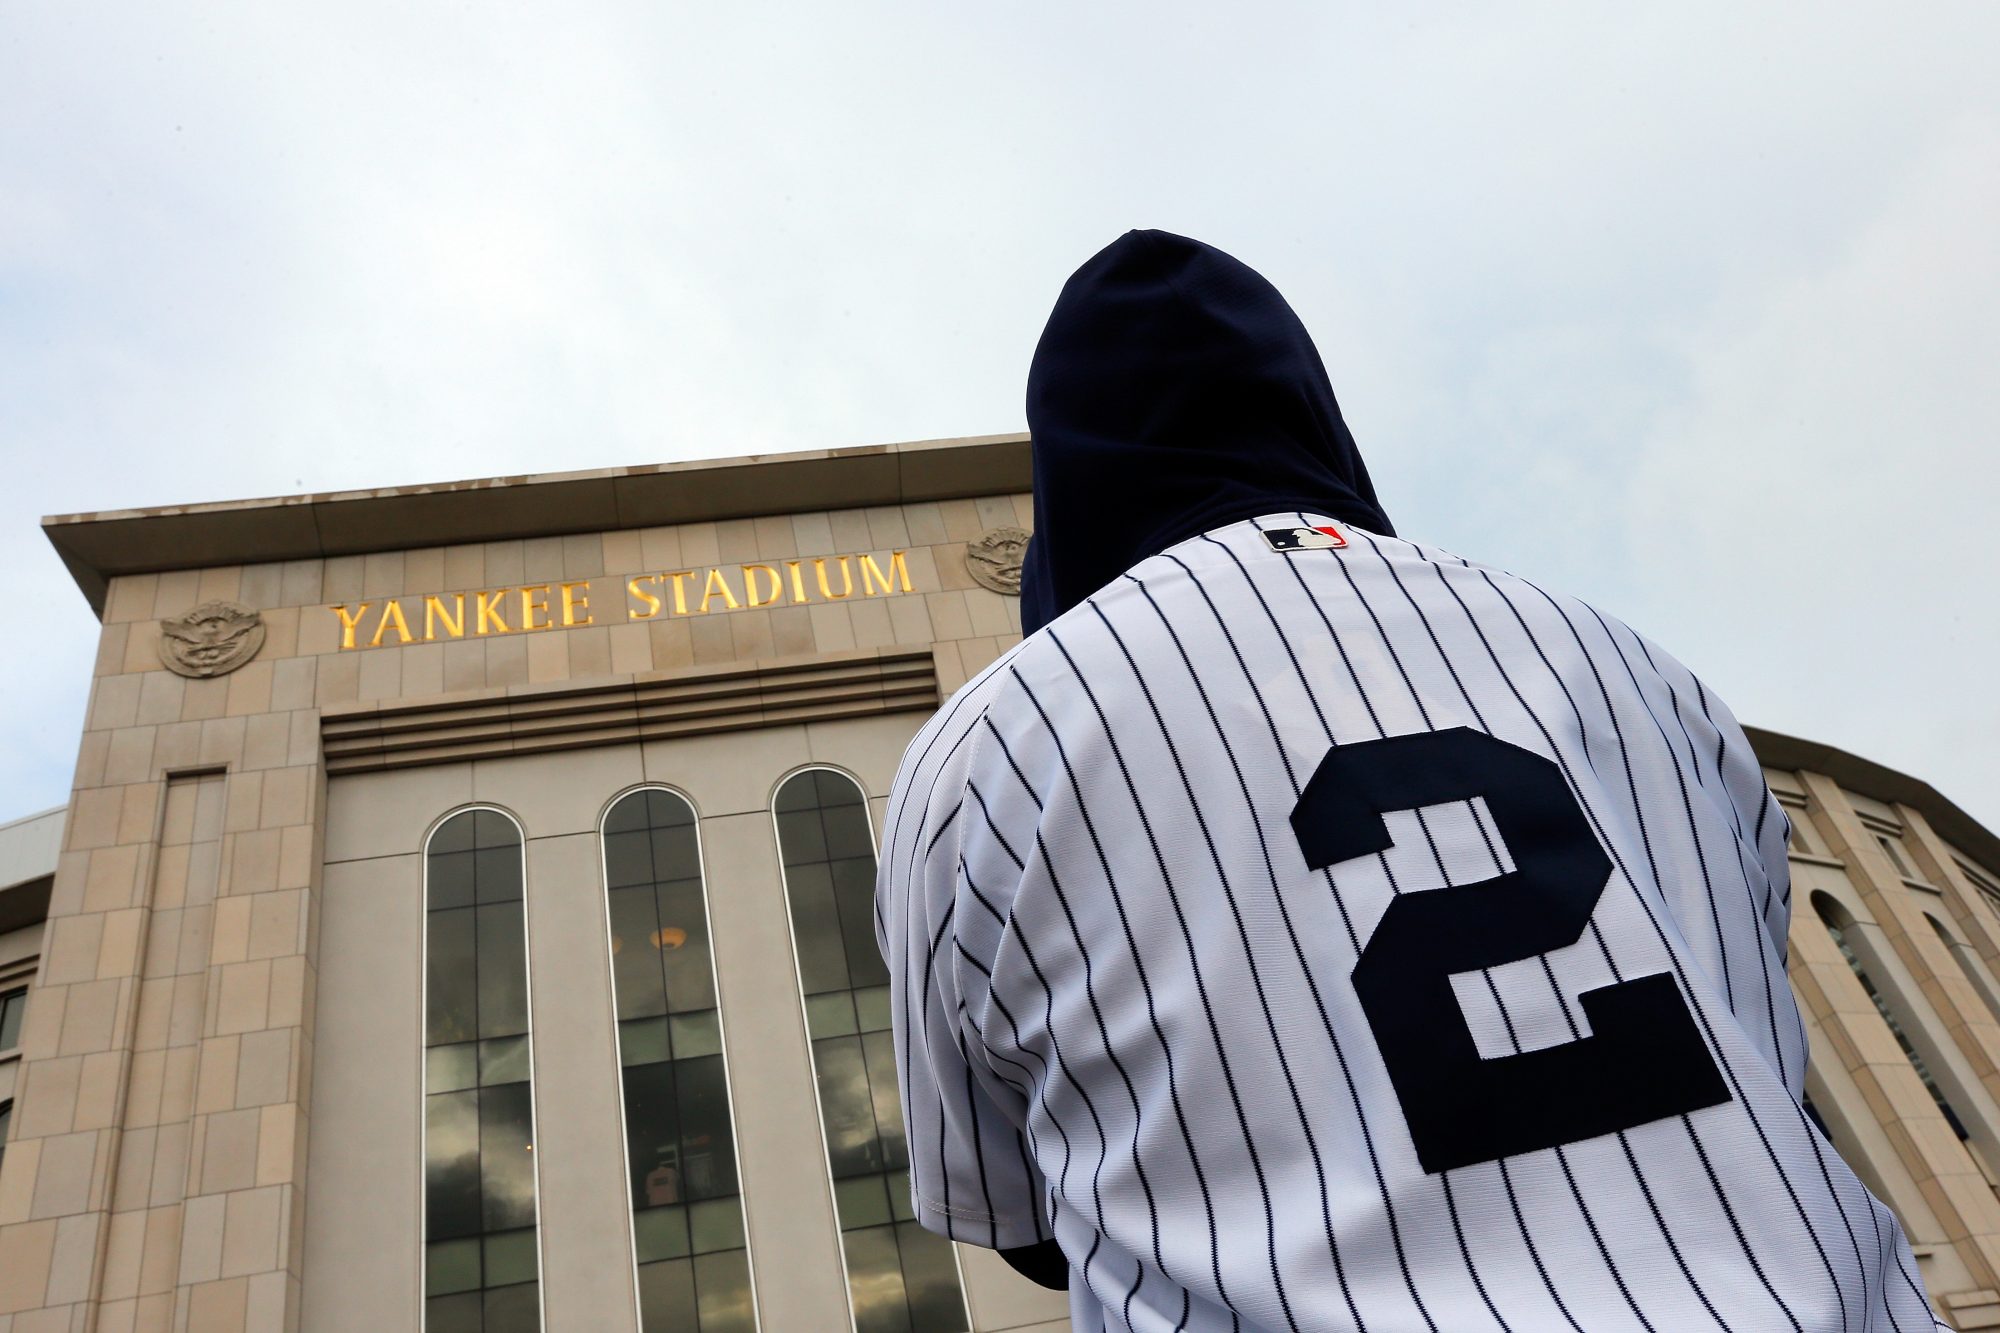 Names On New York Yankees Uniform Insulting to Fans and Tradition 